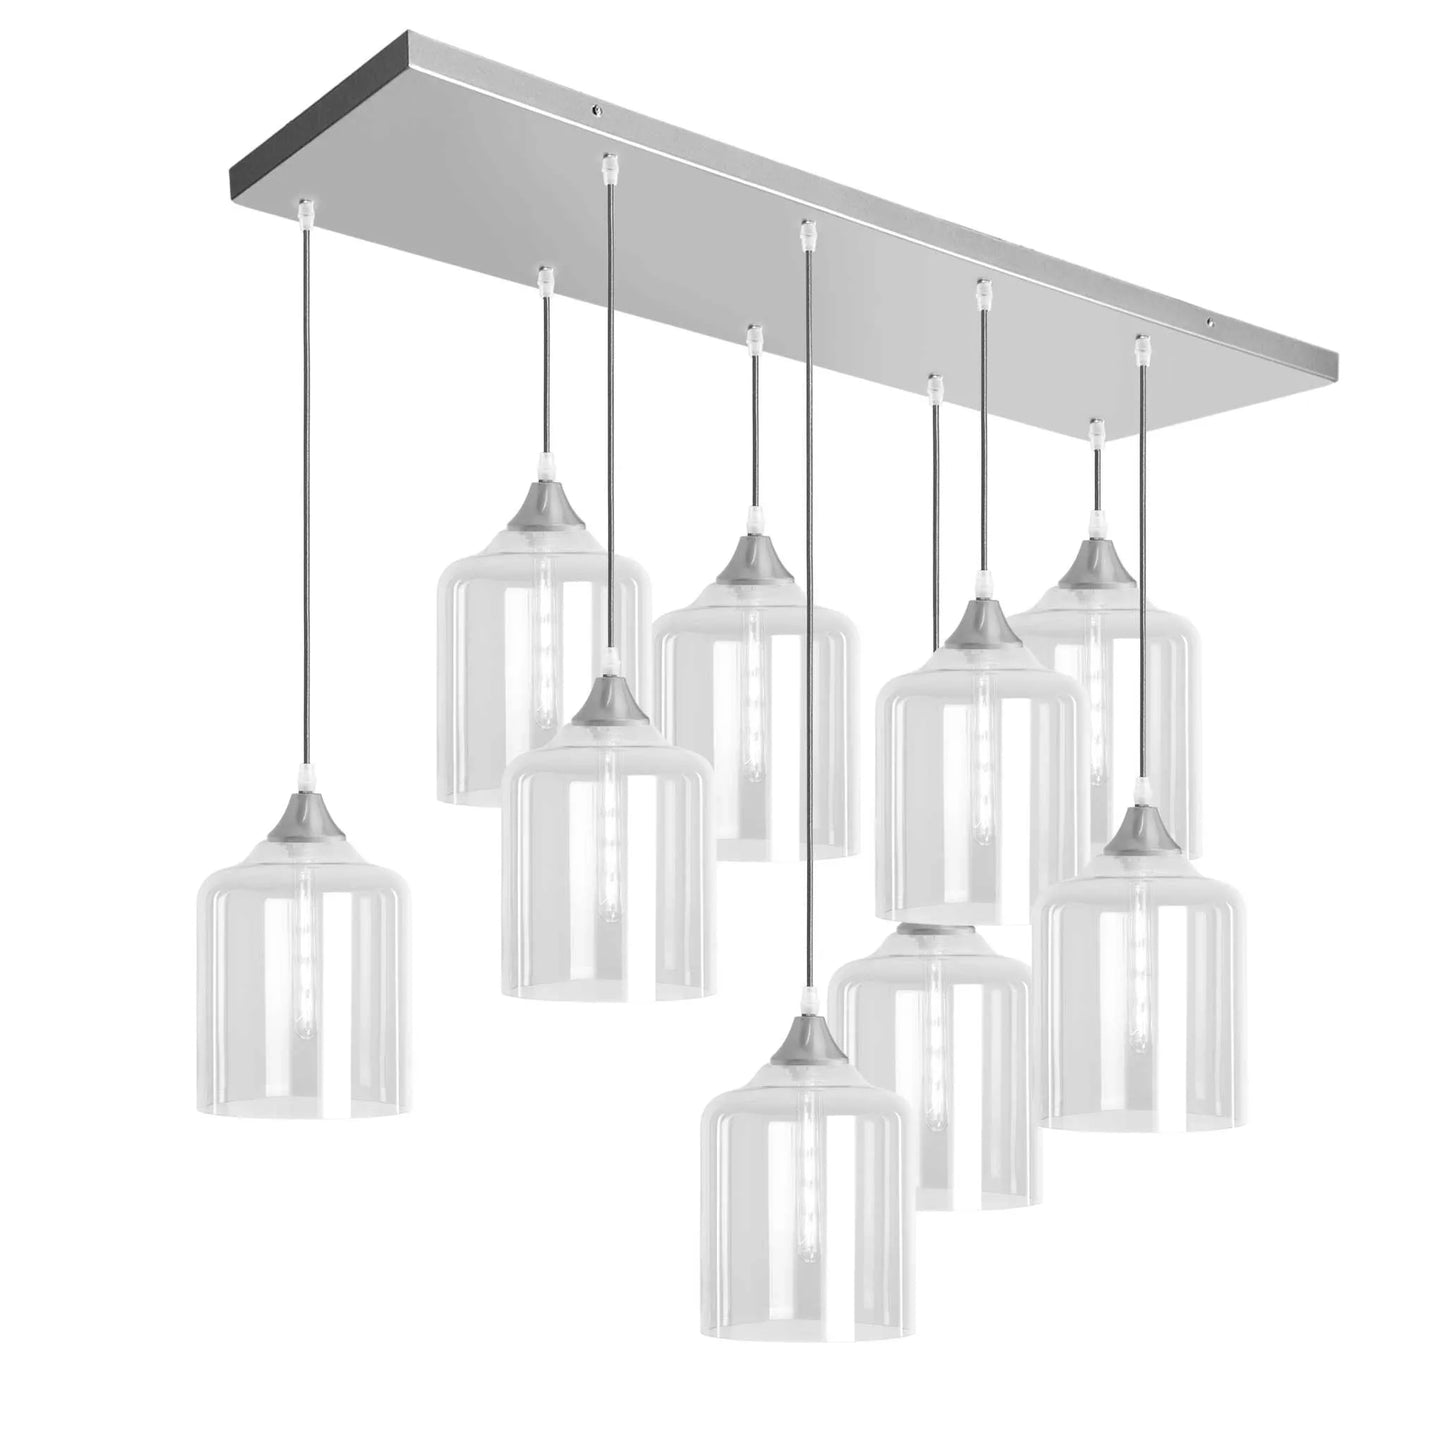 Murano 9 Light Silver Pendant with Extra Large Cylinder Shades